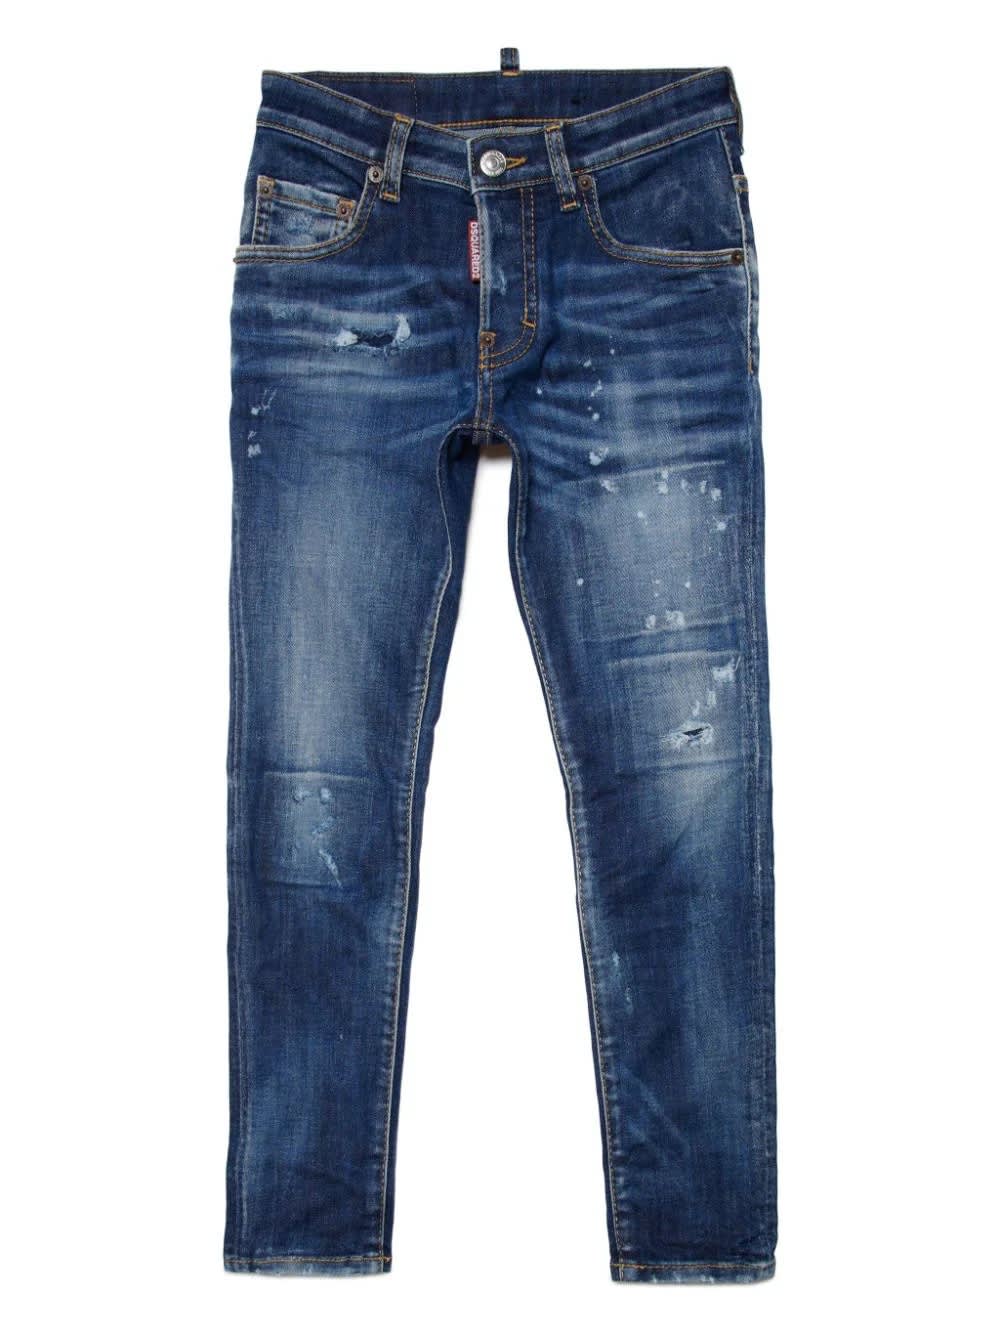 Dsquared2 Skater Skinny Jeans In Dark Blue Washed With Rips